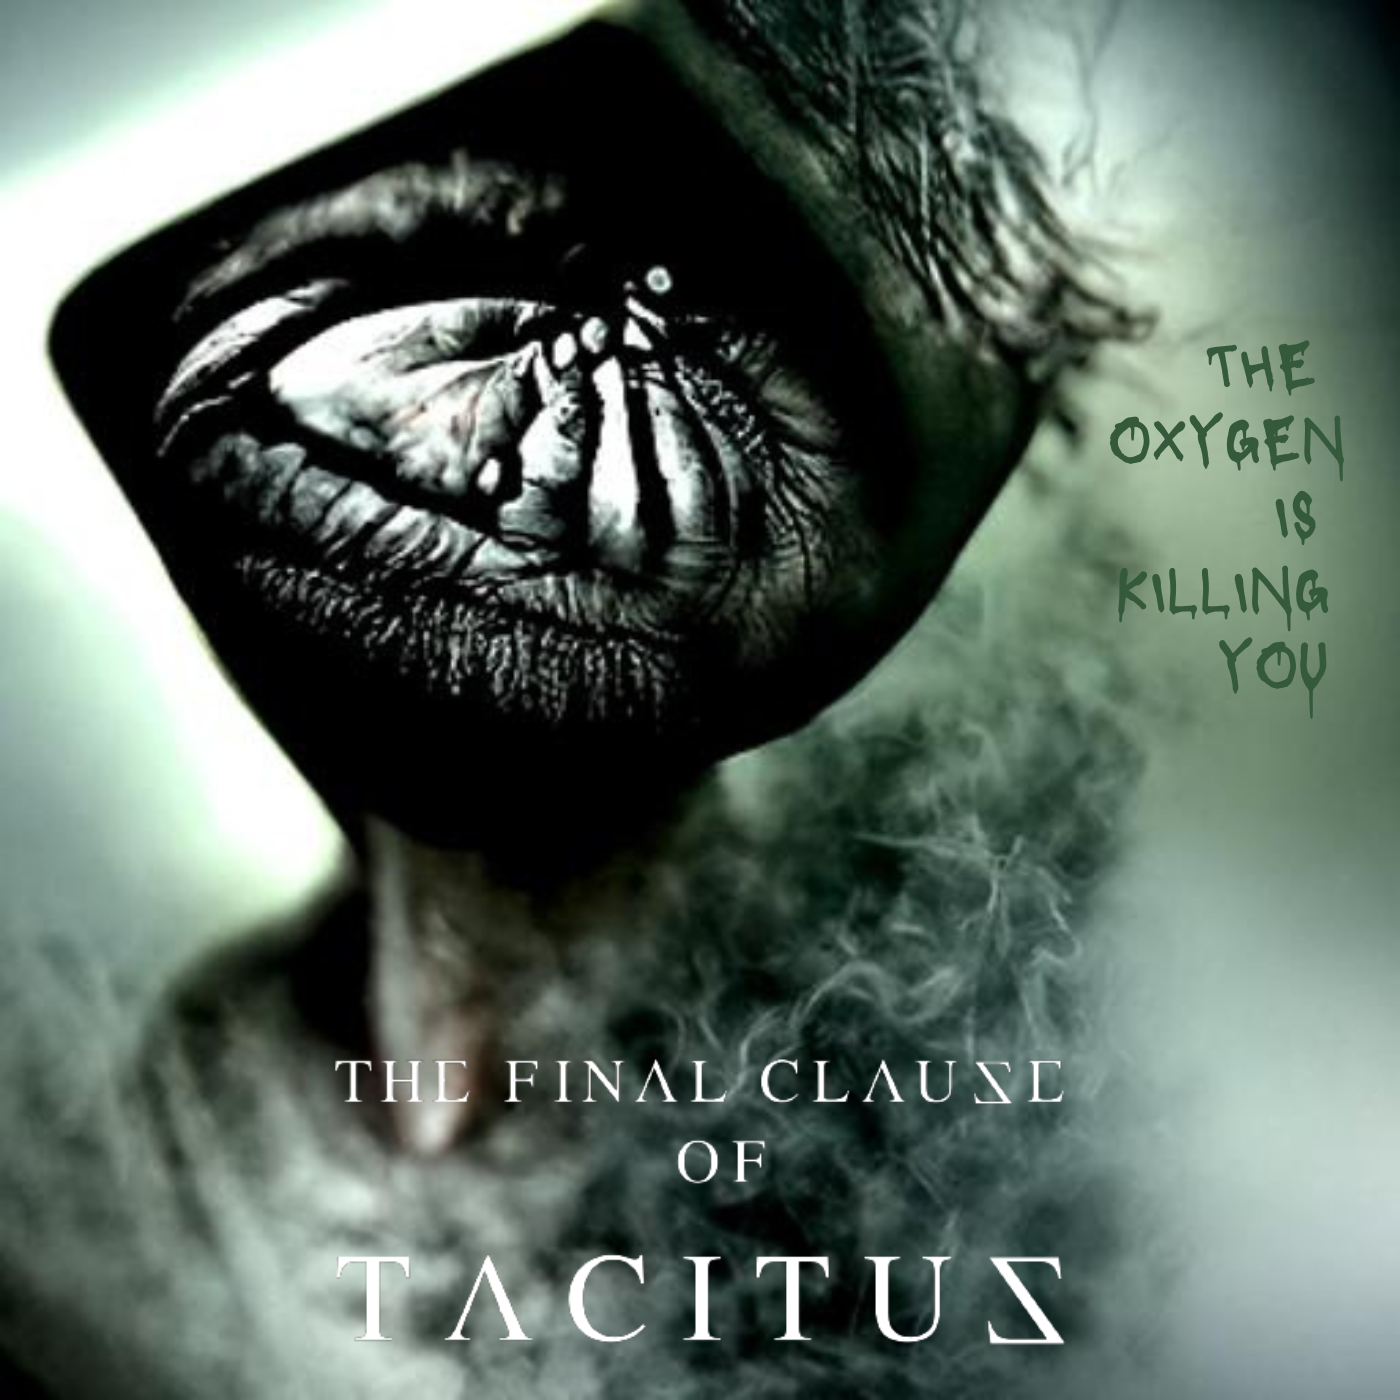 EP REVIEW: The Oxygen is Killing You by The Final Clause of Tacitus